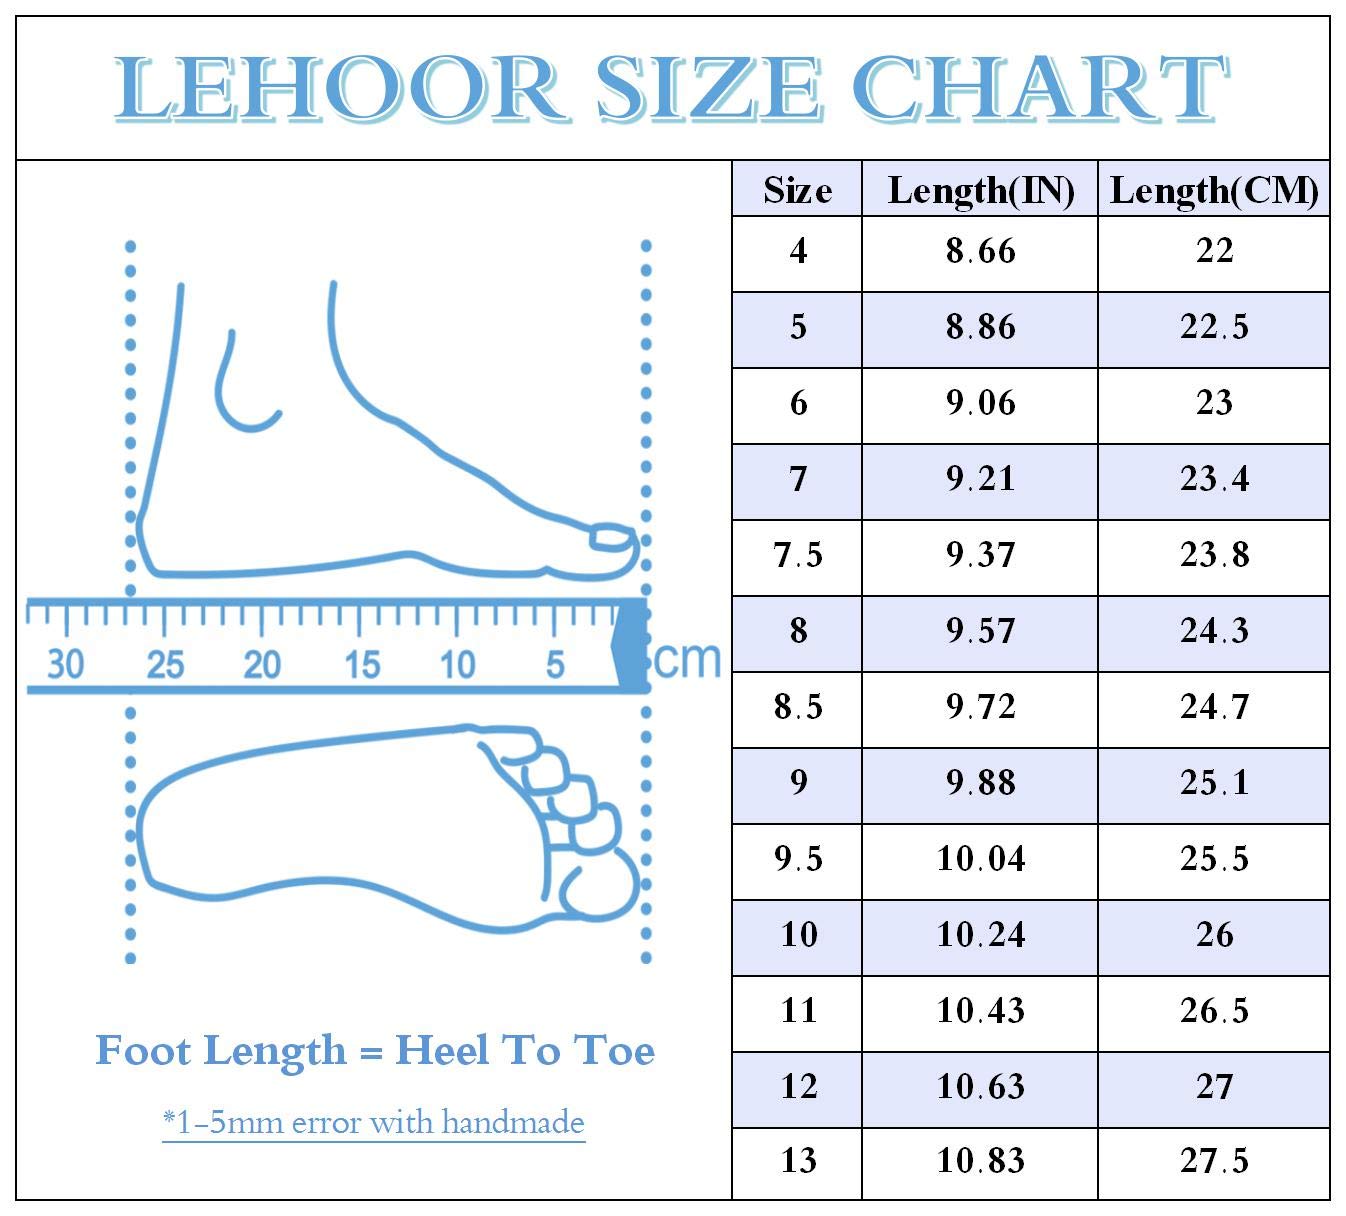 LEHOOR Vintage Cowboy Boots Women Embroidered Mid Calf Western Boots Low Chunky Stacked Heel Pointed Toe Pull On Cowgirl Boots V Cut Velvet Suede Snip Toe Dressy Retro Chic Fall Winter Boot 4-11 M US